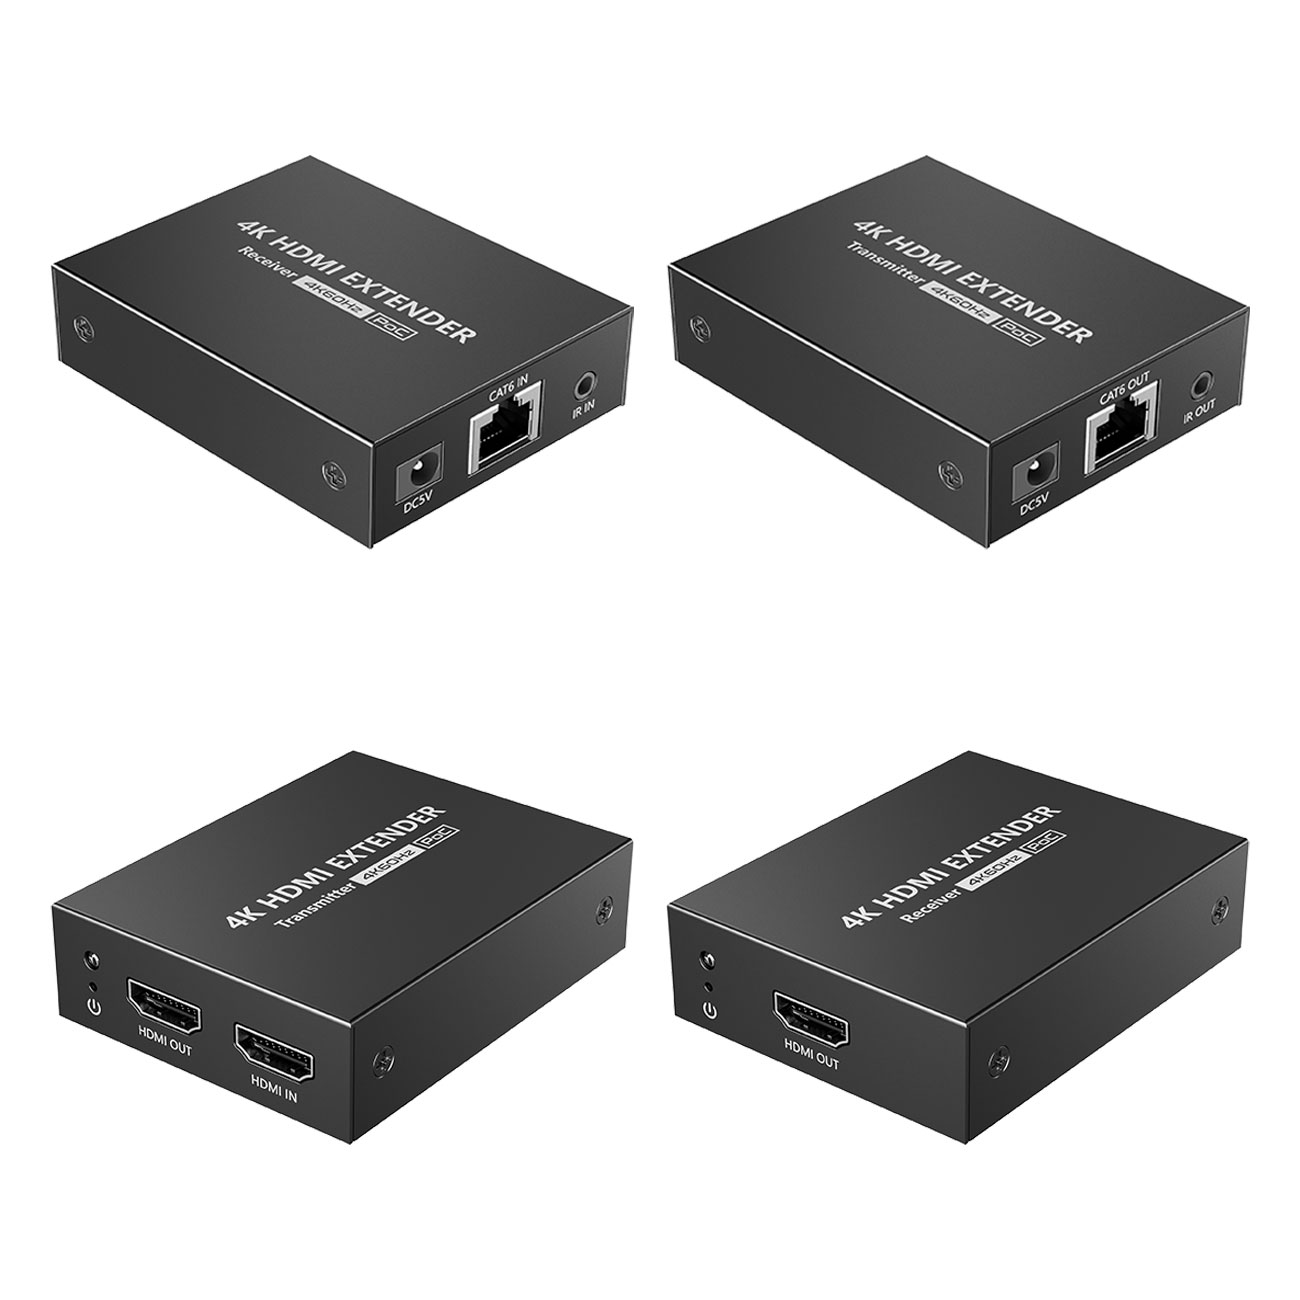 HDMI 2.0 Extender by Cat5e/Cat6 - One to One with POC - 50m